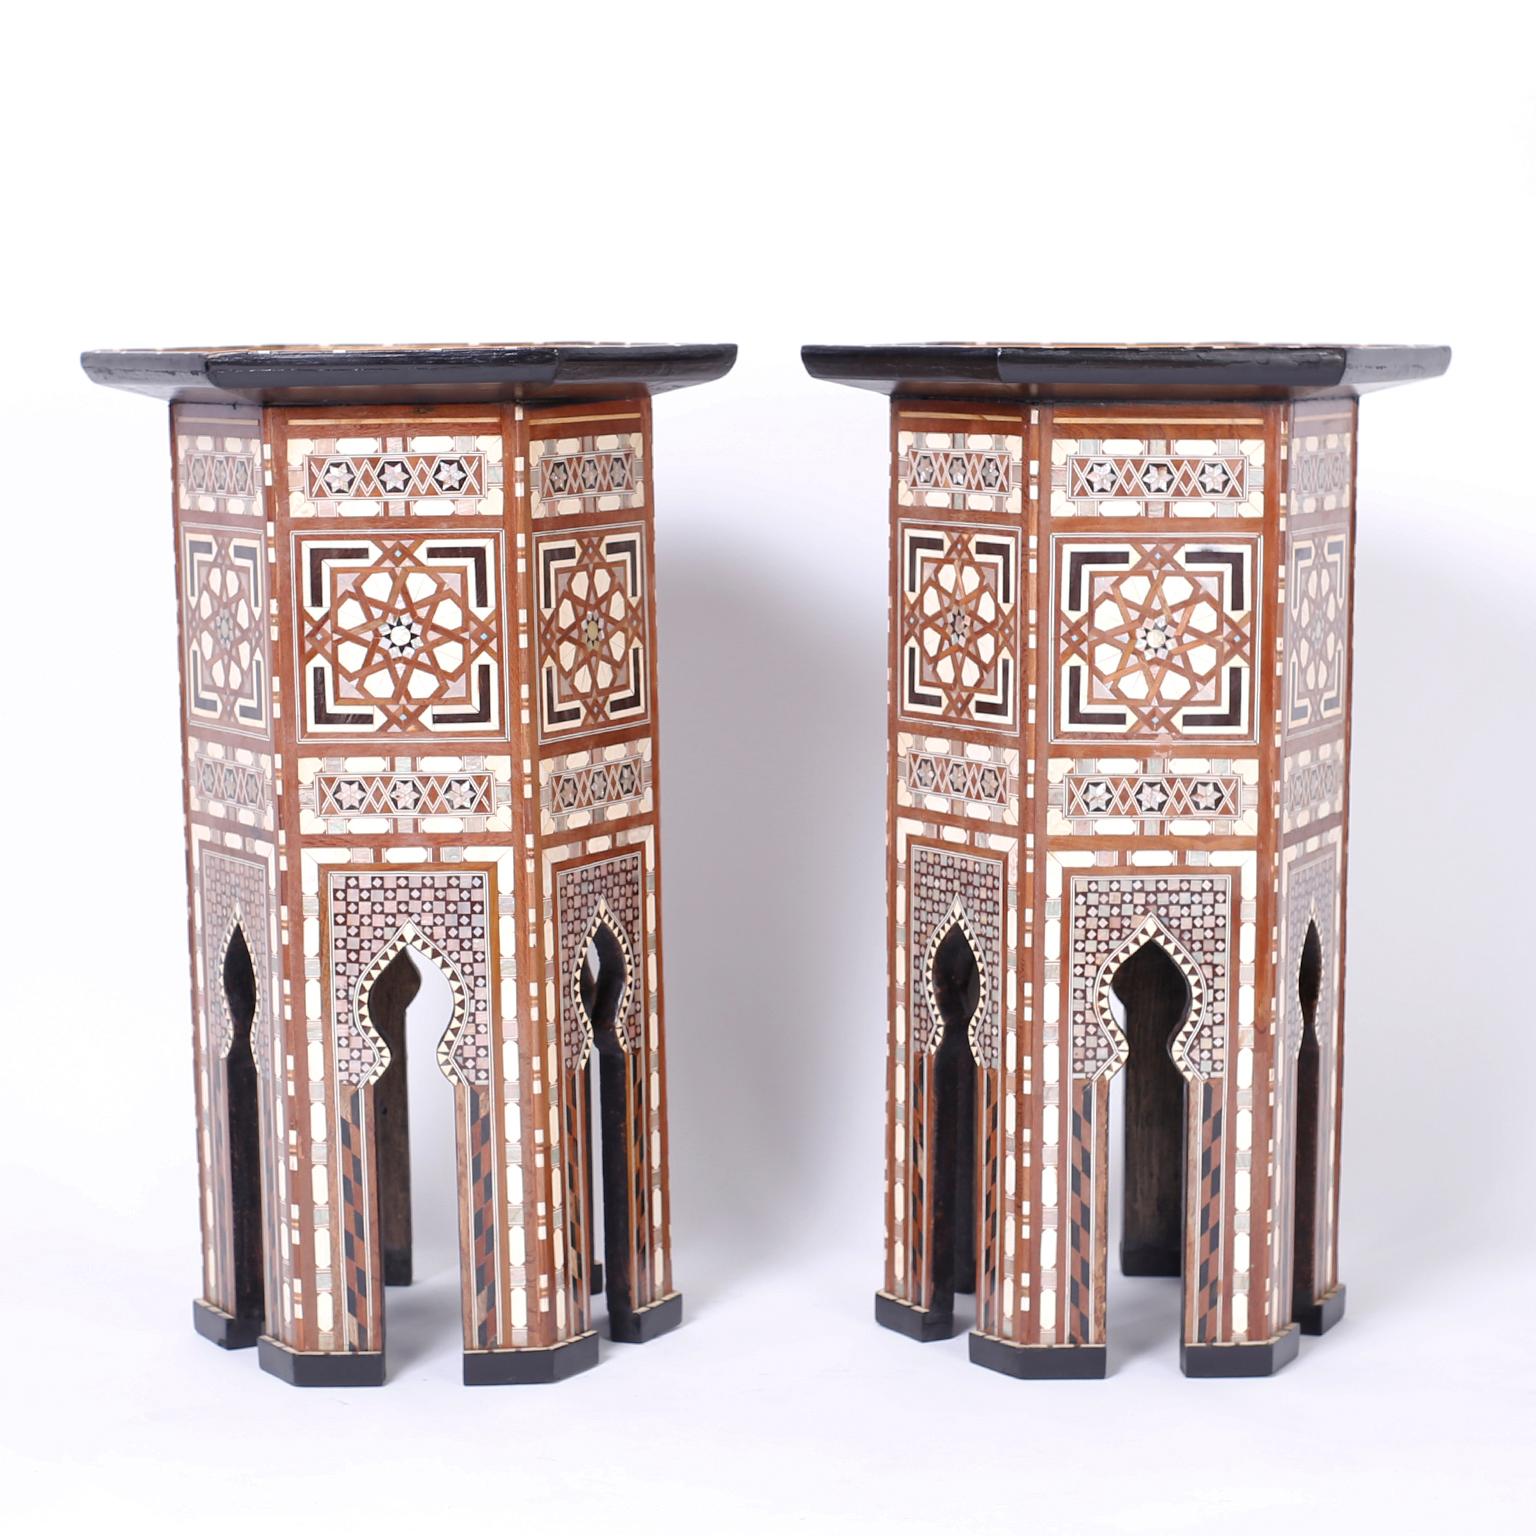 Pair of antique Syrian stands with a hexagon form crafted in mahogany with dramatic geometric inlays of mother of pearl, ebony, kingwood, and bone on the tops and all sides. The legs have architecturally interesting Moorish arches on block feet.